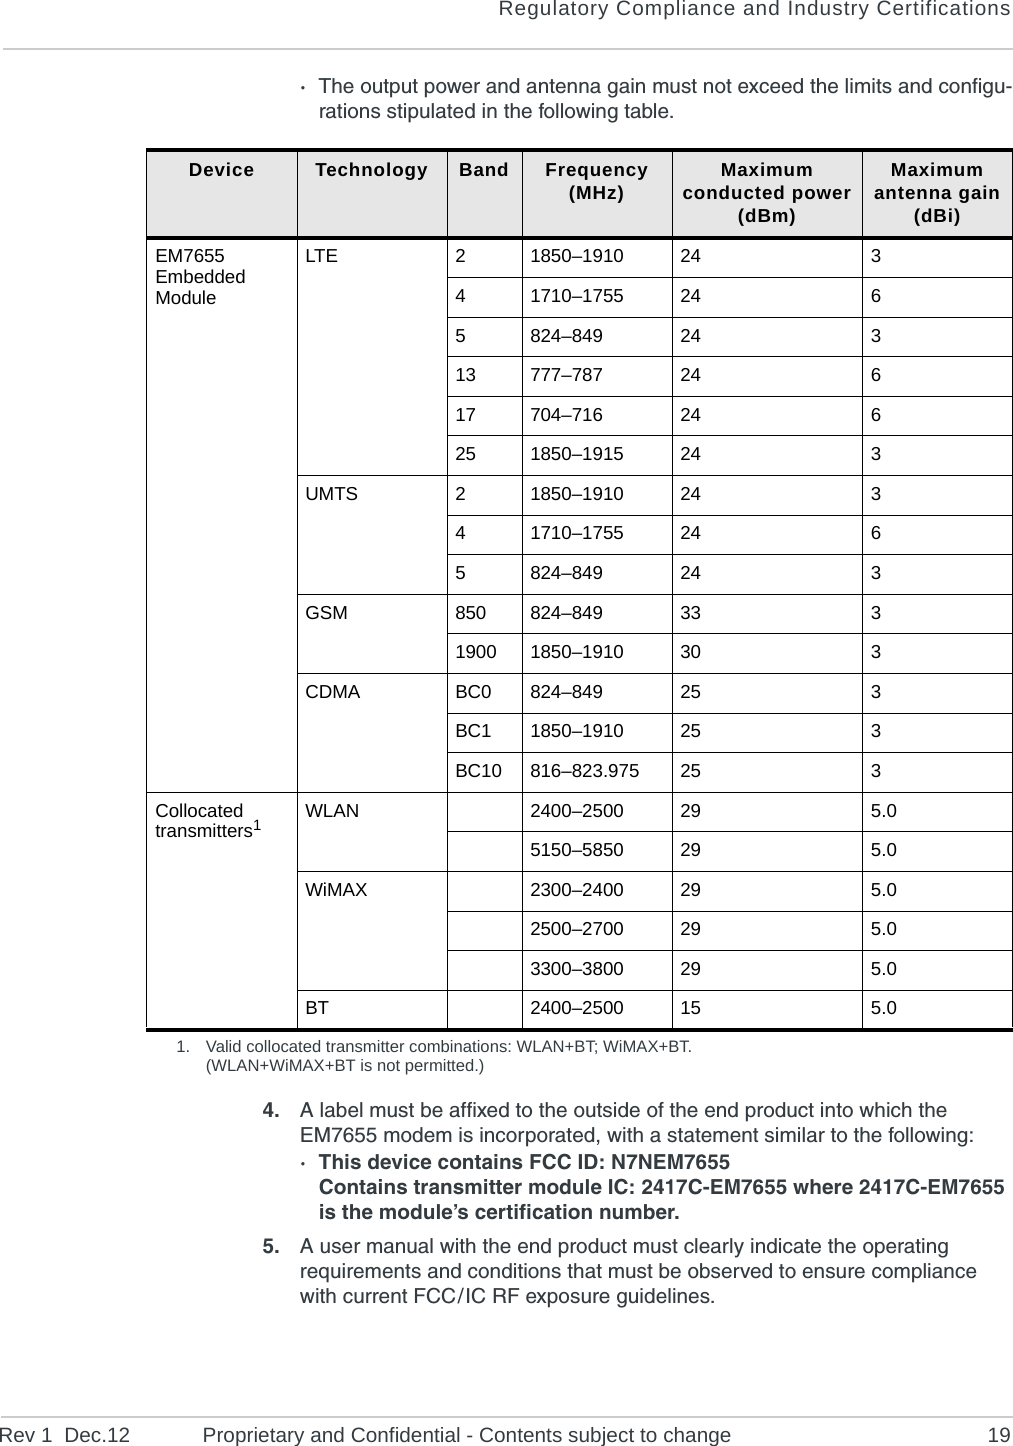 Regulatory Compliance and Industry CertificationsRev 1  Dec.12 Proprietary and Confidential - Contents subject to change 19·The output power and antenna gain must not exceed the limits and configu-rations stipulated in the following table.4. A label must be affixed to the outside of the end product into which the EM7655 modem is incorporated, with a statement similar to the following:· This device contains FCC ID: N7NEM7655Contains transmitter module IC: 2417C-EM7655 where 2417C-EM7655 is the module’s certification number.5. A user manual with the end product must clearly indicate the operating requirements and conditions that must be observed to ensure compliance with current FCC / IC RF exposure guidelines.Device Technology Band Frequency(MHz) Maximum conducted power(dBm)Maximum antenna gain(dBi)EM7655 Embedded ModuleLTE 21850–1910 24 341710–1755 24 65824–849 24 313 777–787 24 617 704–716 24 625 1850–1915 24 3UMTS 21850–1910 24 341710–1755 24 65824–849 24 3GSM 850 824–849 33 31900 1850–1910 30 3CDMA BC0 824–849 25 3BC1 1850–1910 25 3BC10 816–823.975 25 3Collocated transmitters1WLAN 2400–2500 29 5.05150–5850 29 5.0WiMAX 2300–2400 29 5.02500–2700 29 5.03300–3800 29 5.0BT 2400–2500 15 5.01. Valid collocated transmitter combinations: WLAN+BT; WiMAX+BT.(WLAN+WiMAX+BT is not permitted.)